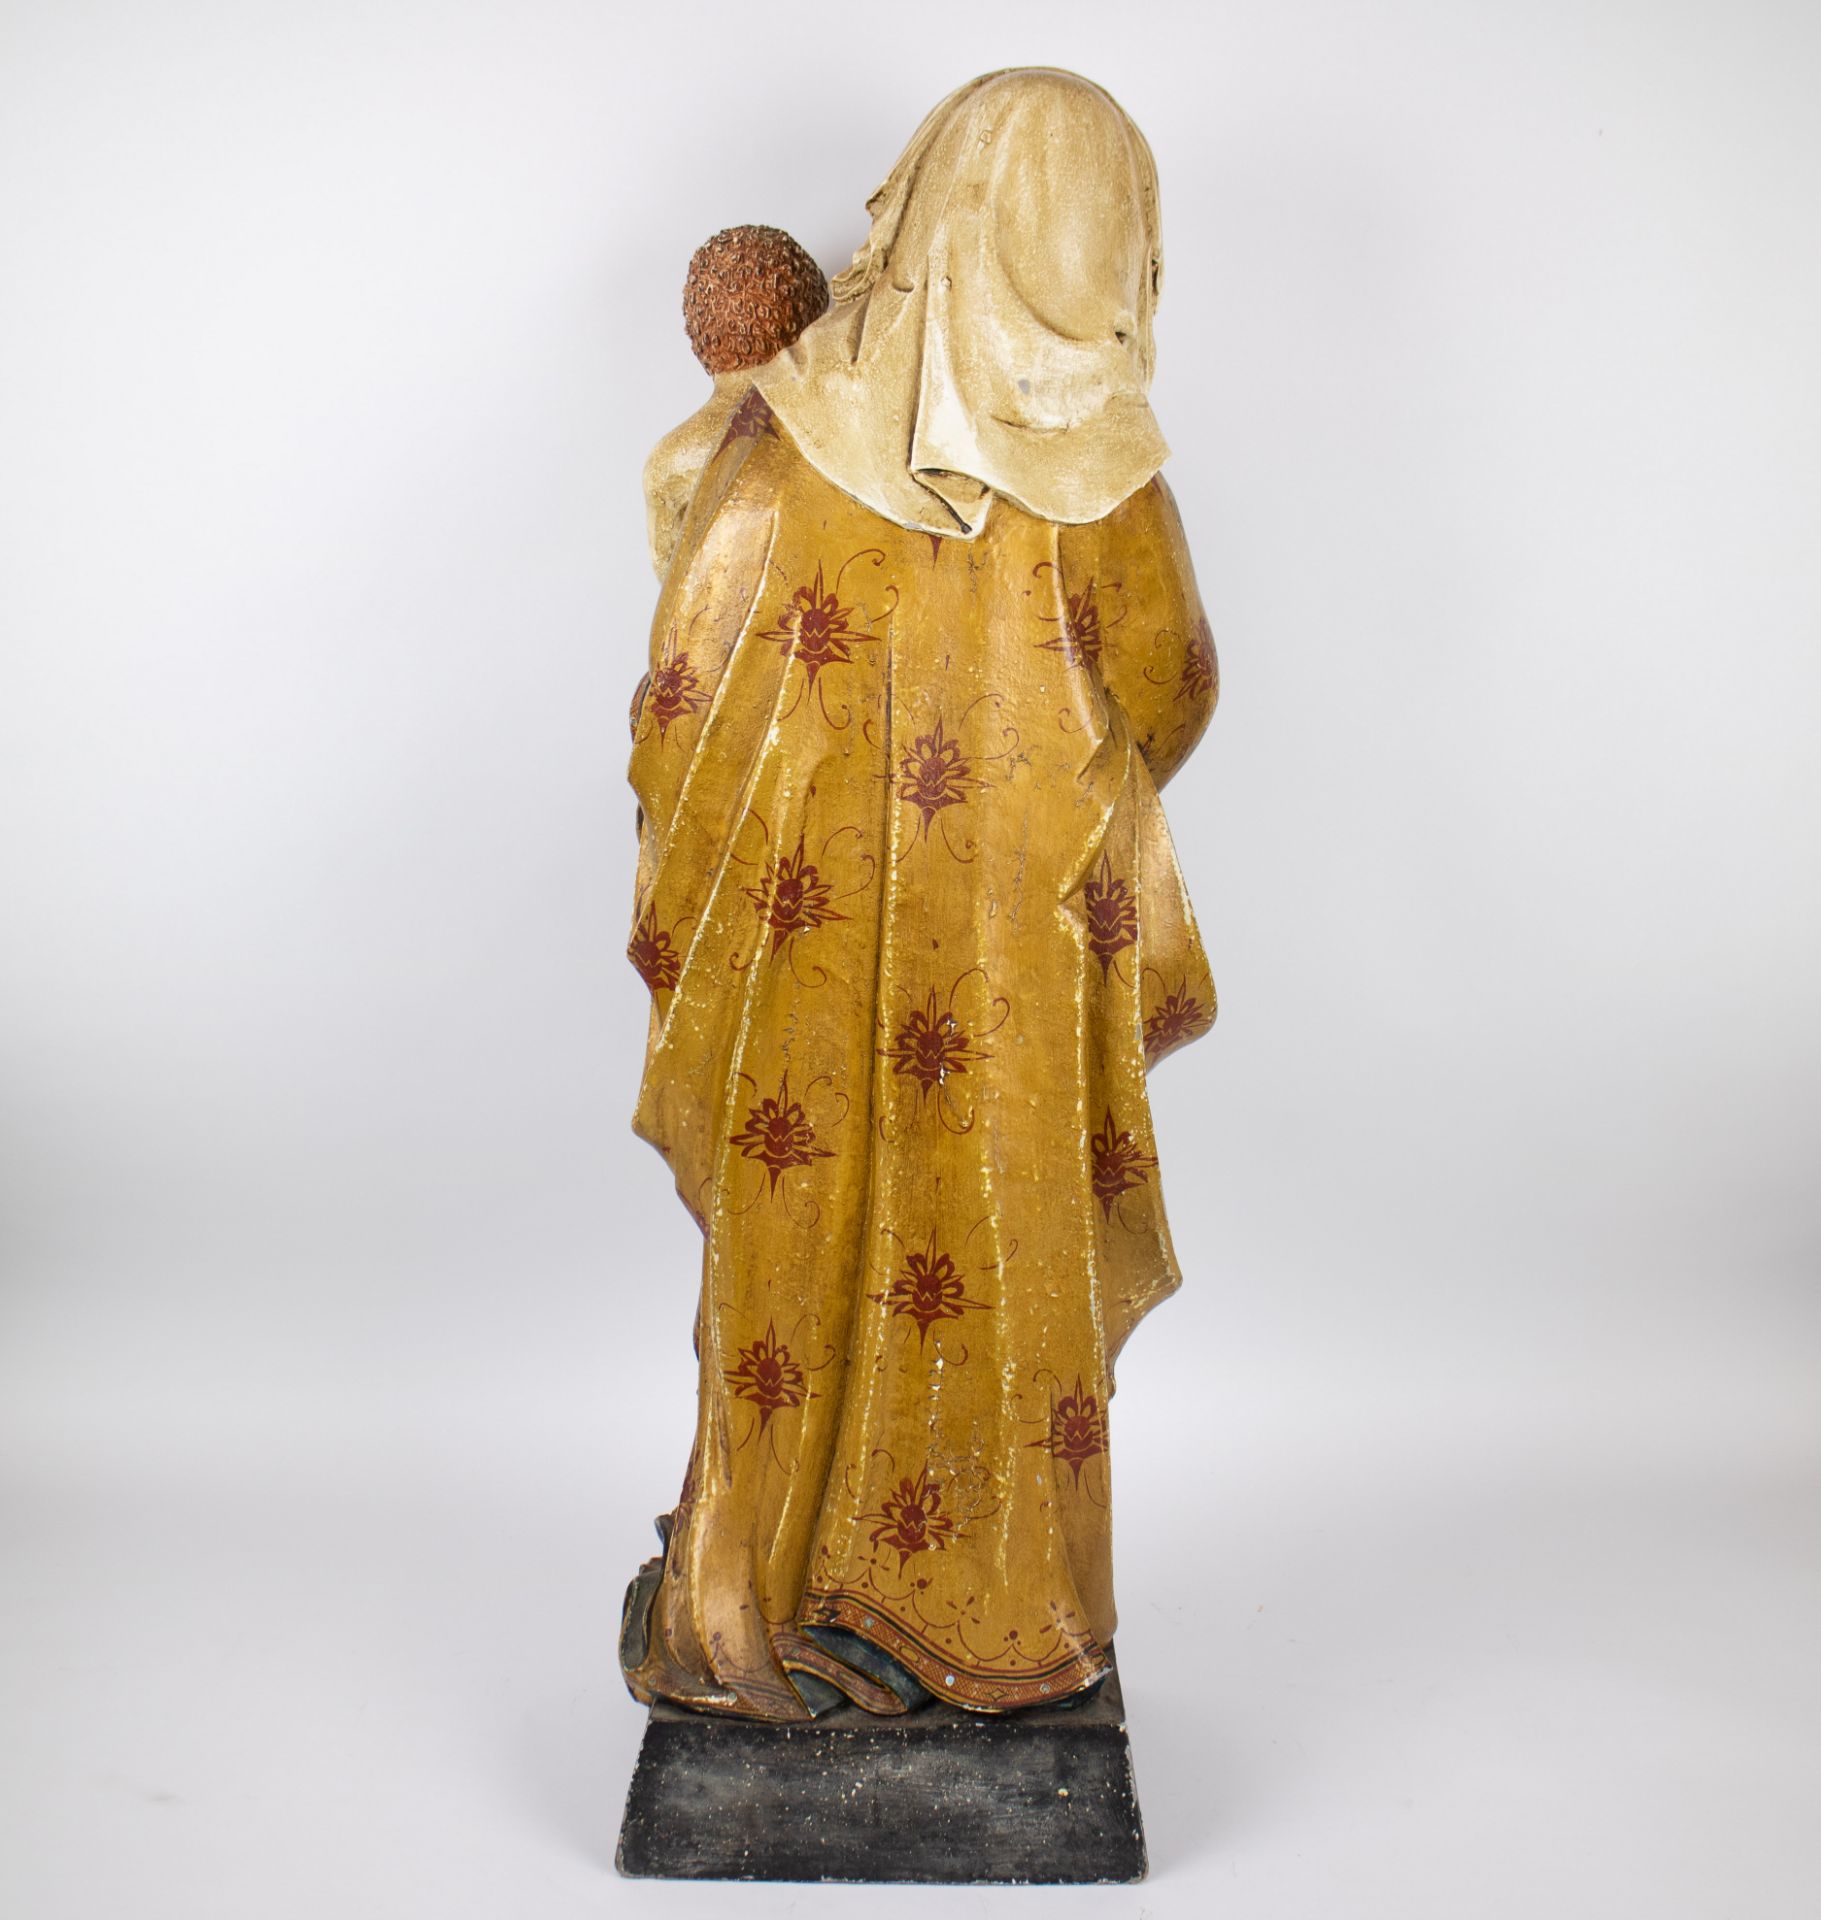 Polychrome wooden statue of Mary with child - Image 4 of 5